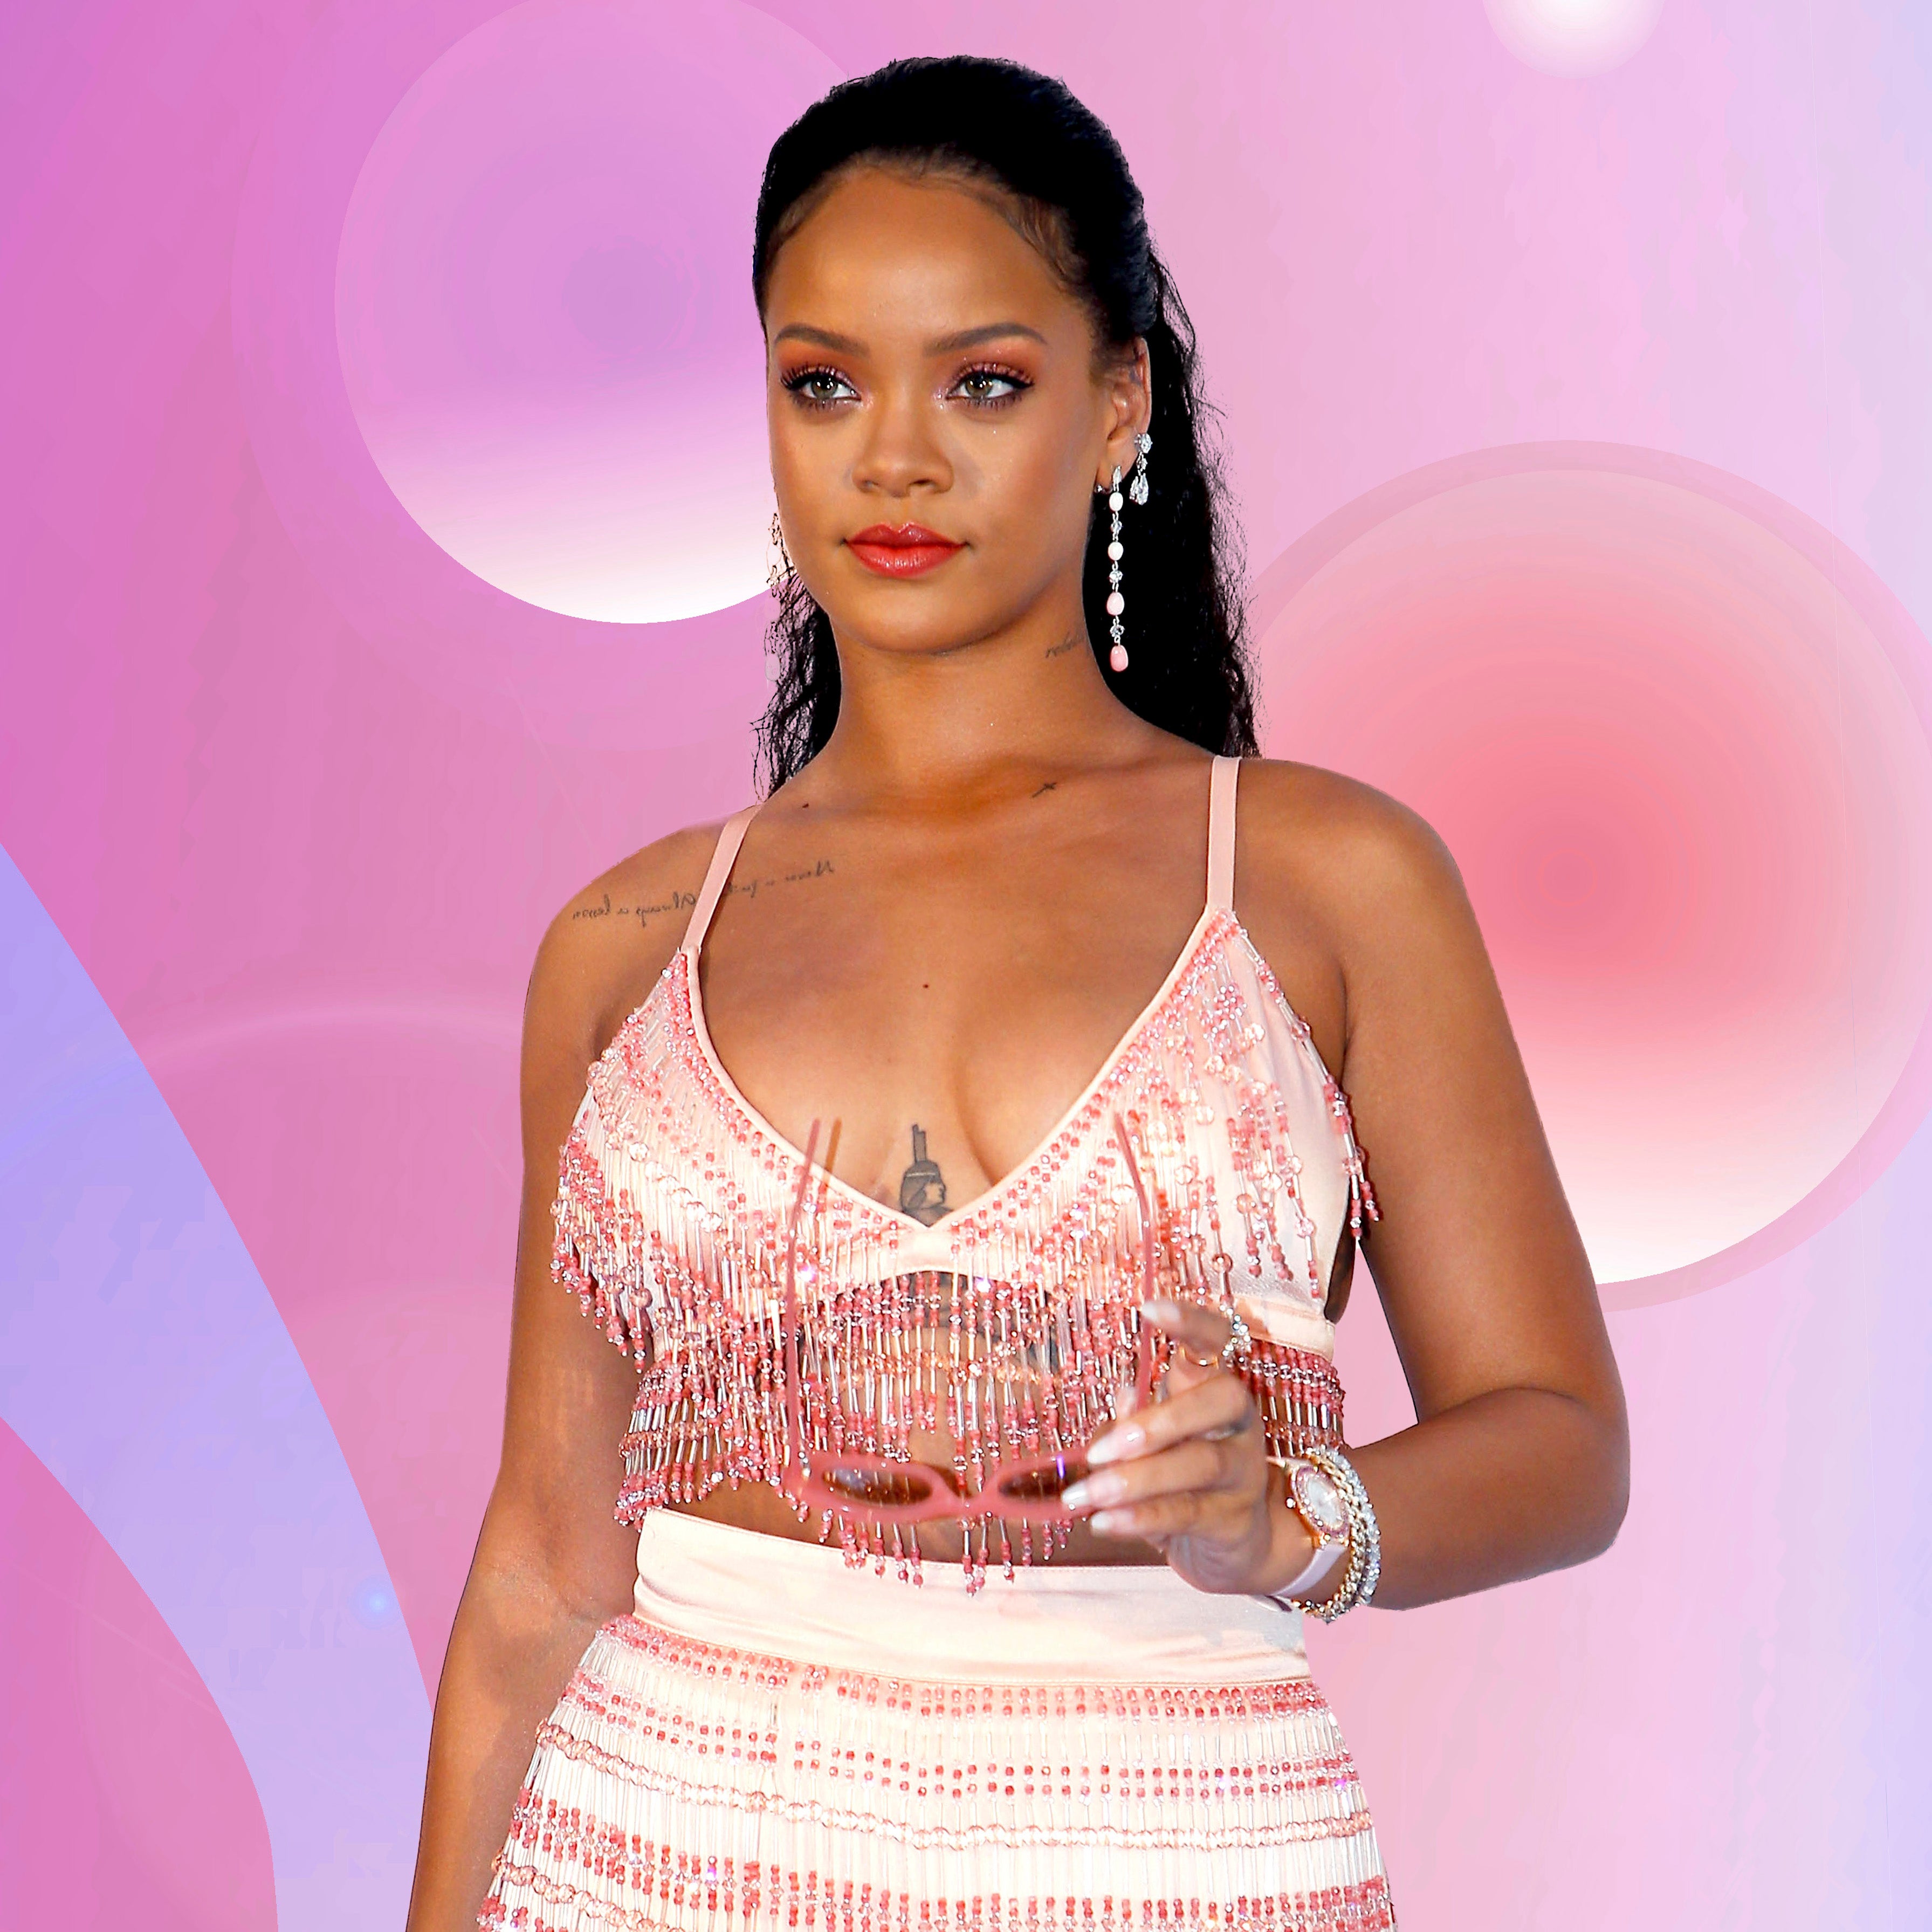 Rihanna May Have Said No To The NFL But Here’s 10 Times She Said Yes To Fashion